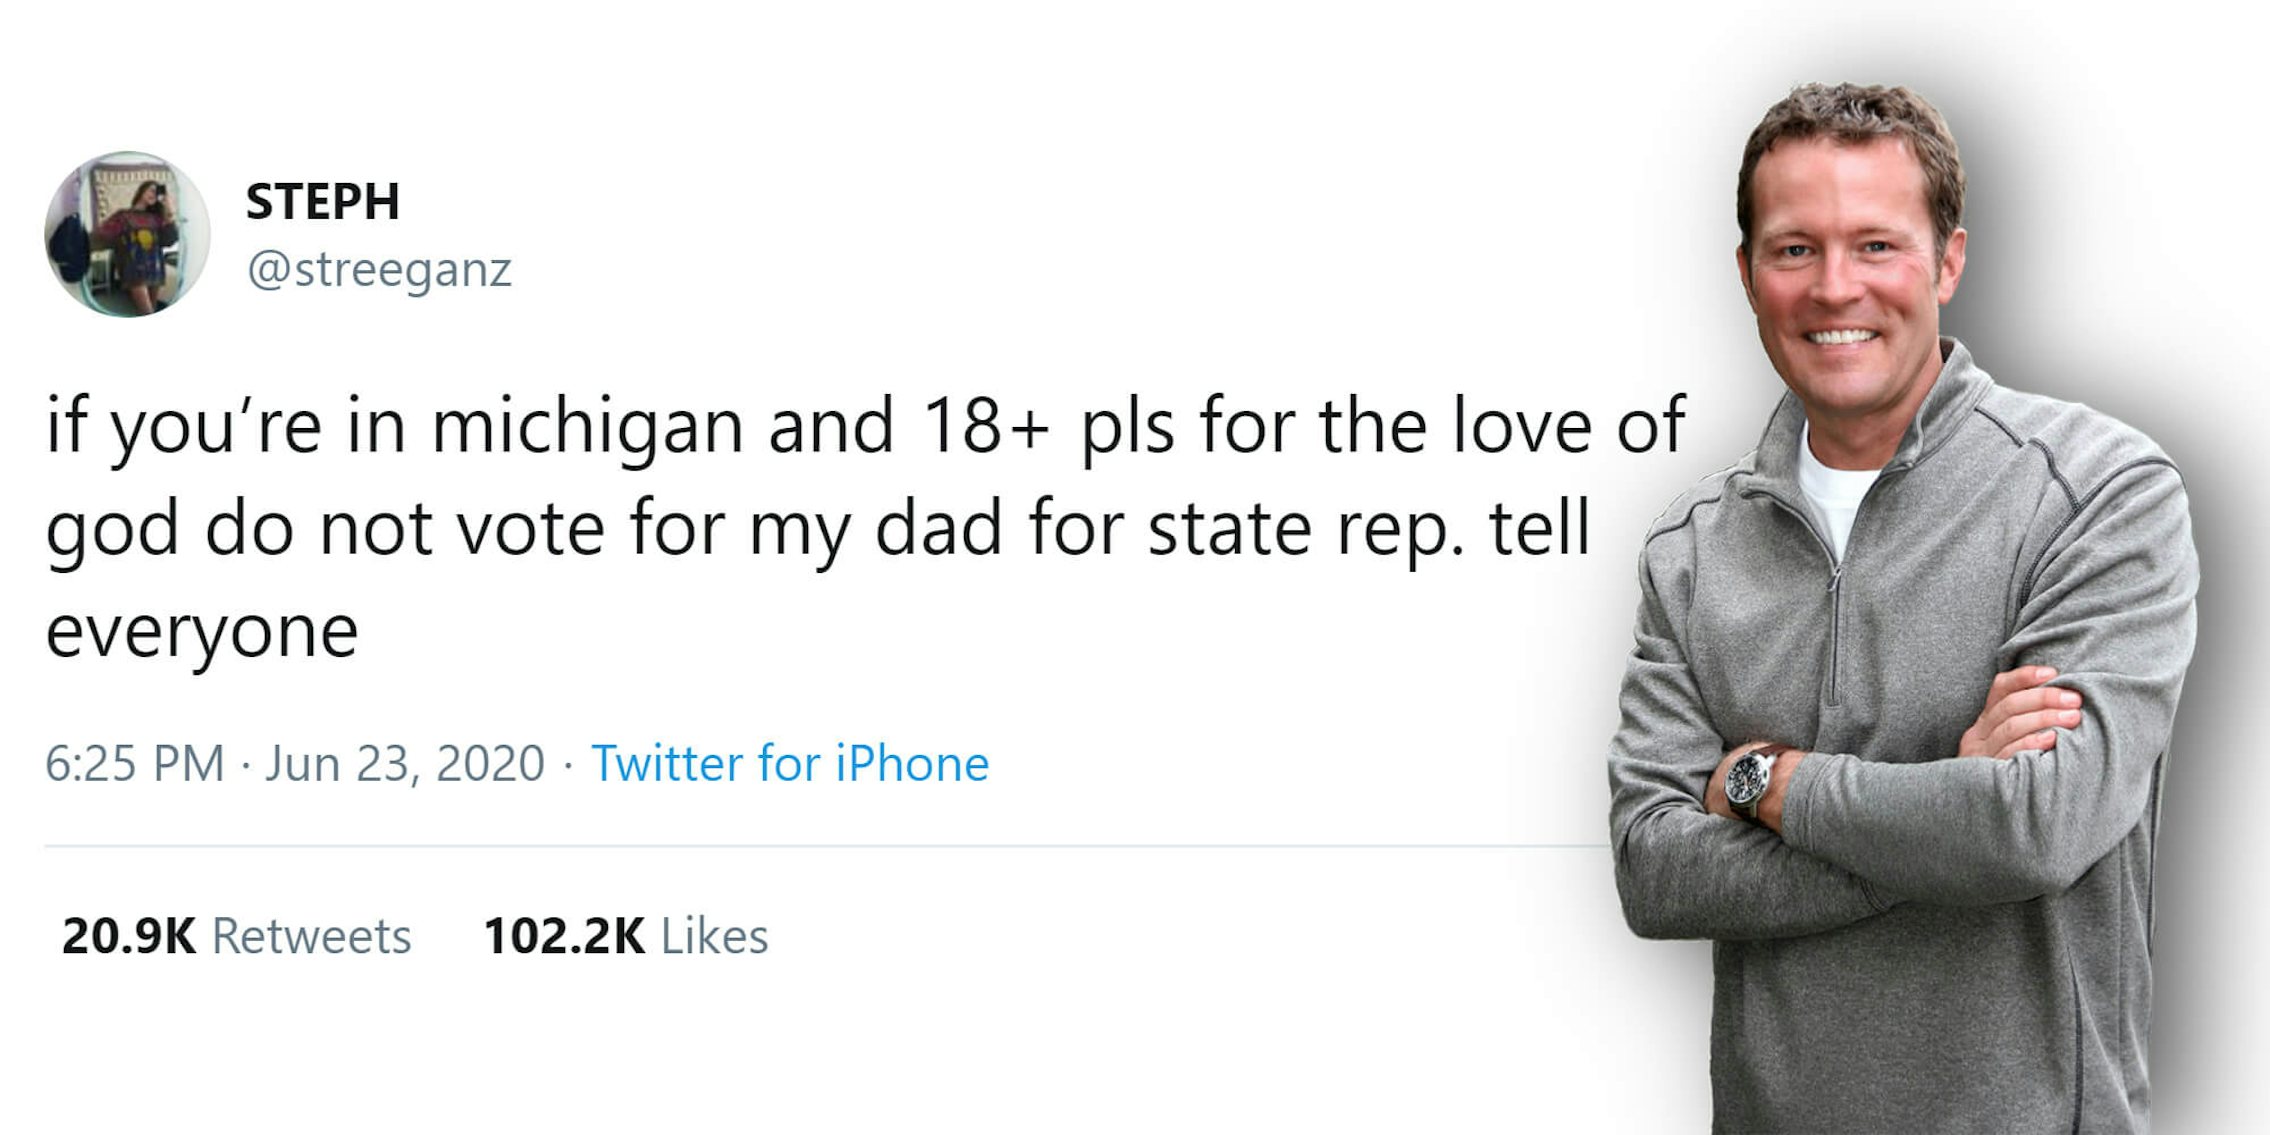 robert regan with tweet from daughter 'if you're in michigan and 18+ pls for the love of god do not vote for my dad for state rep. tell everyone'